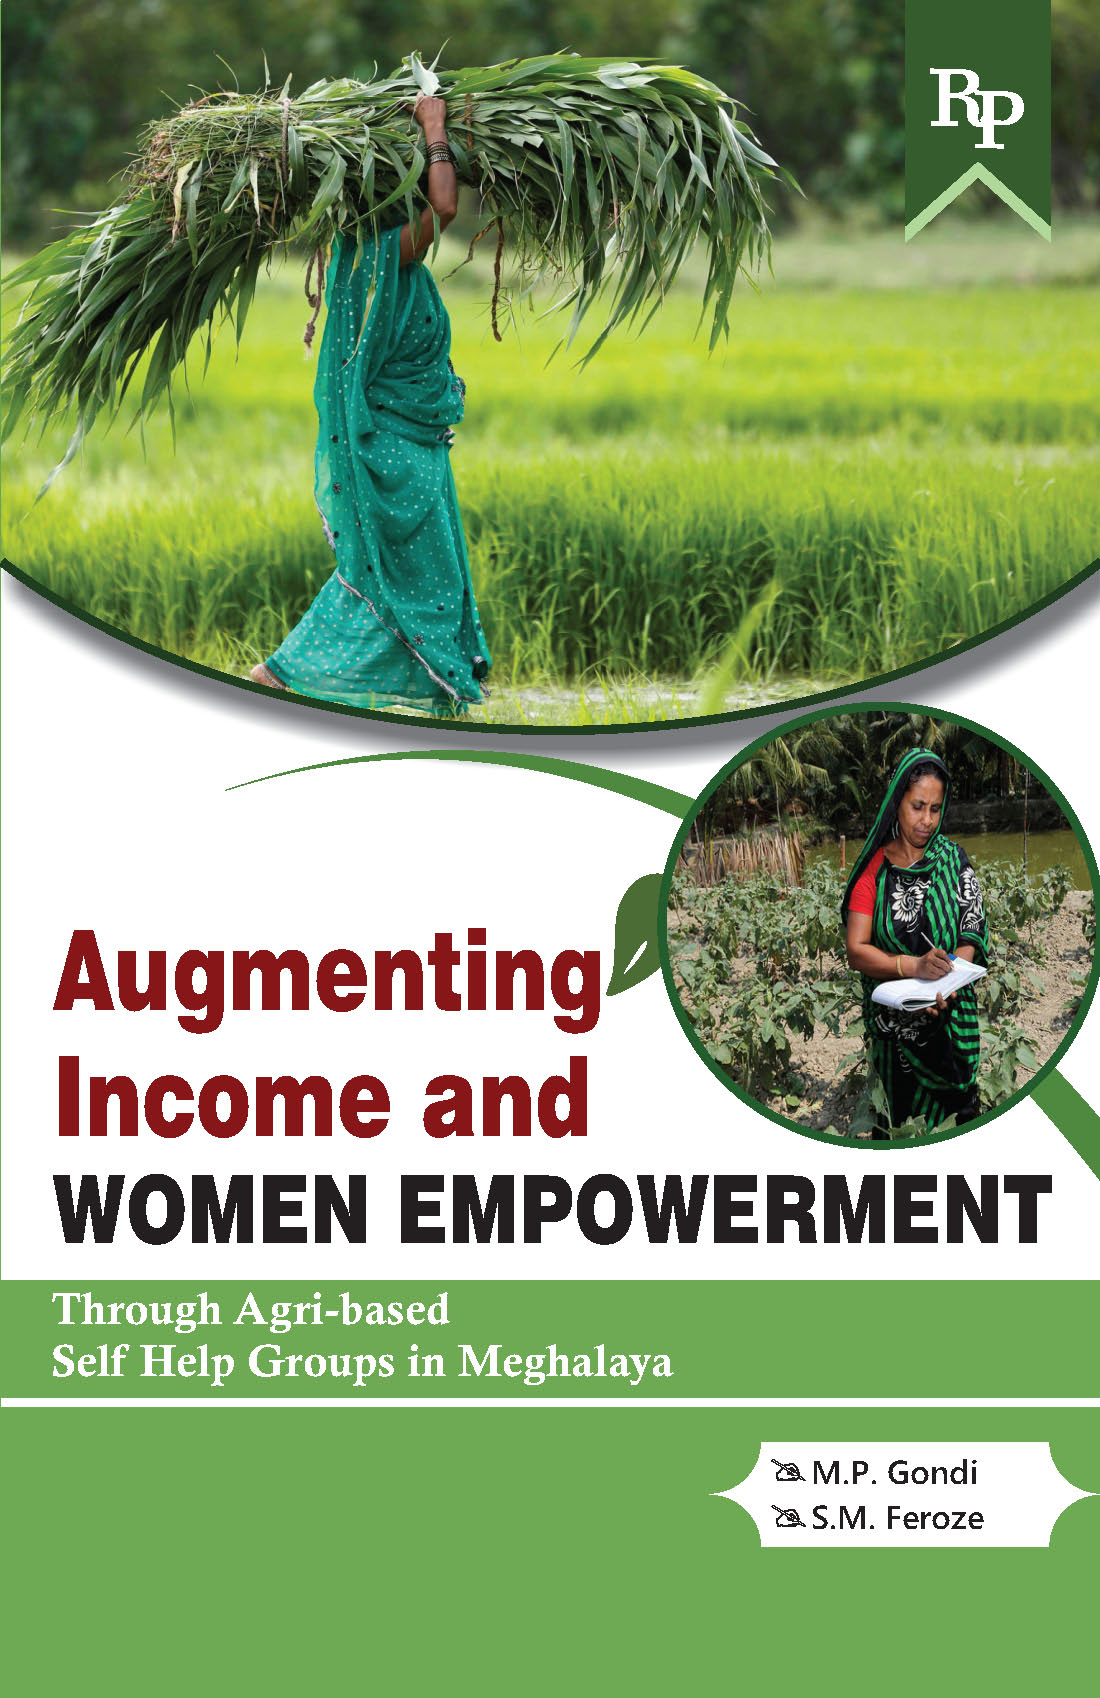 Augmenting income and Women Empowerment through Agri-based Self Help Groups in Meghalaya Cover.jpg